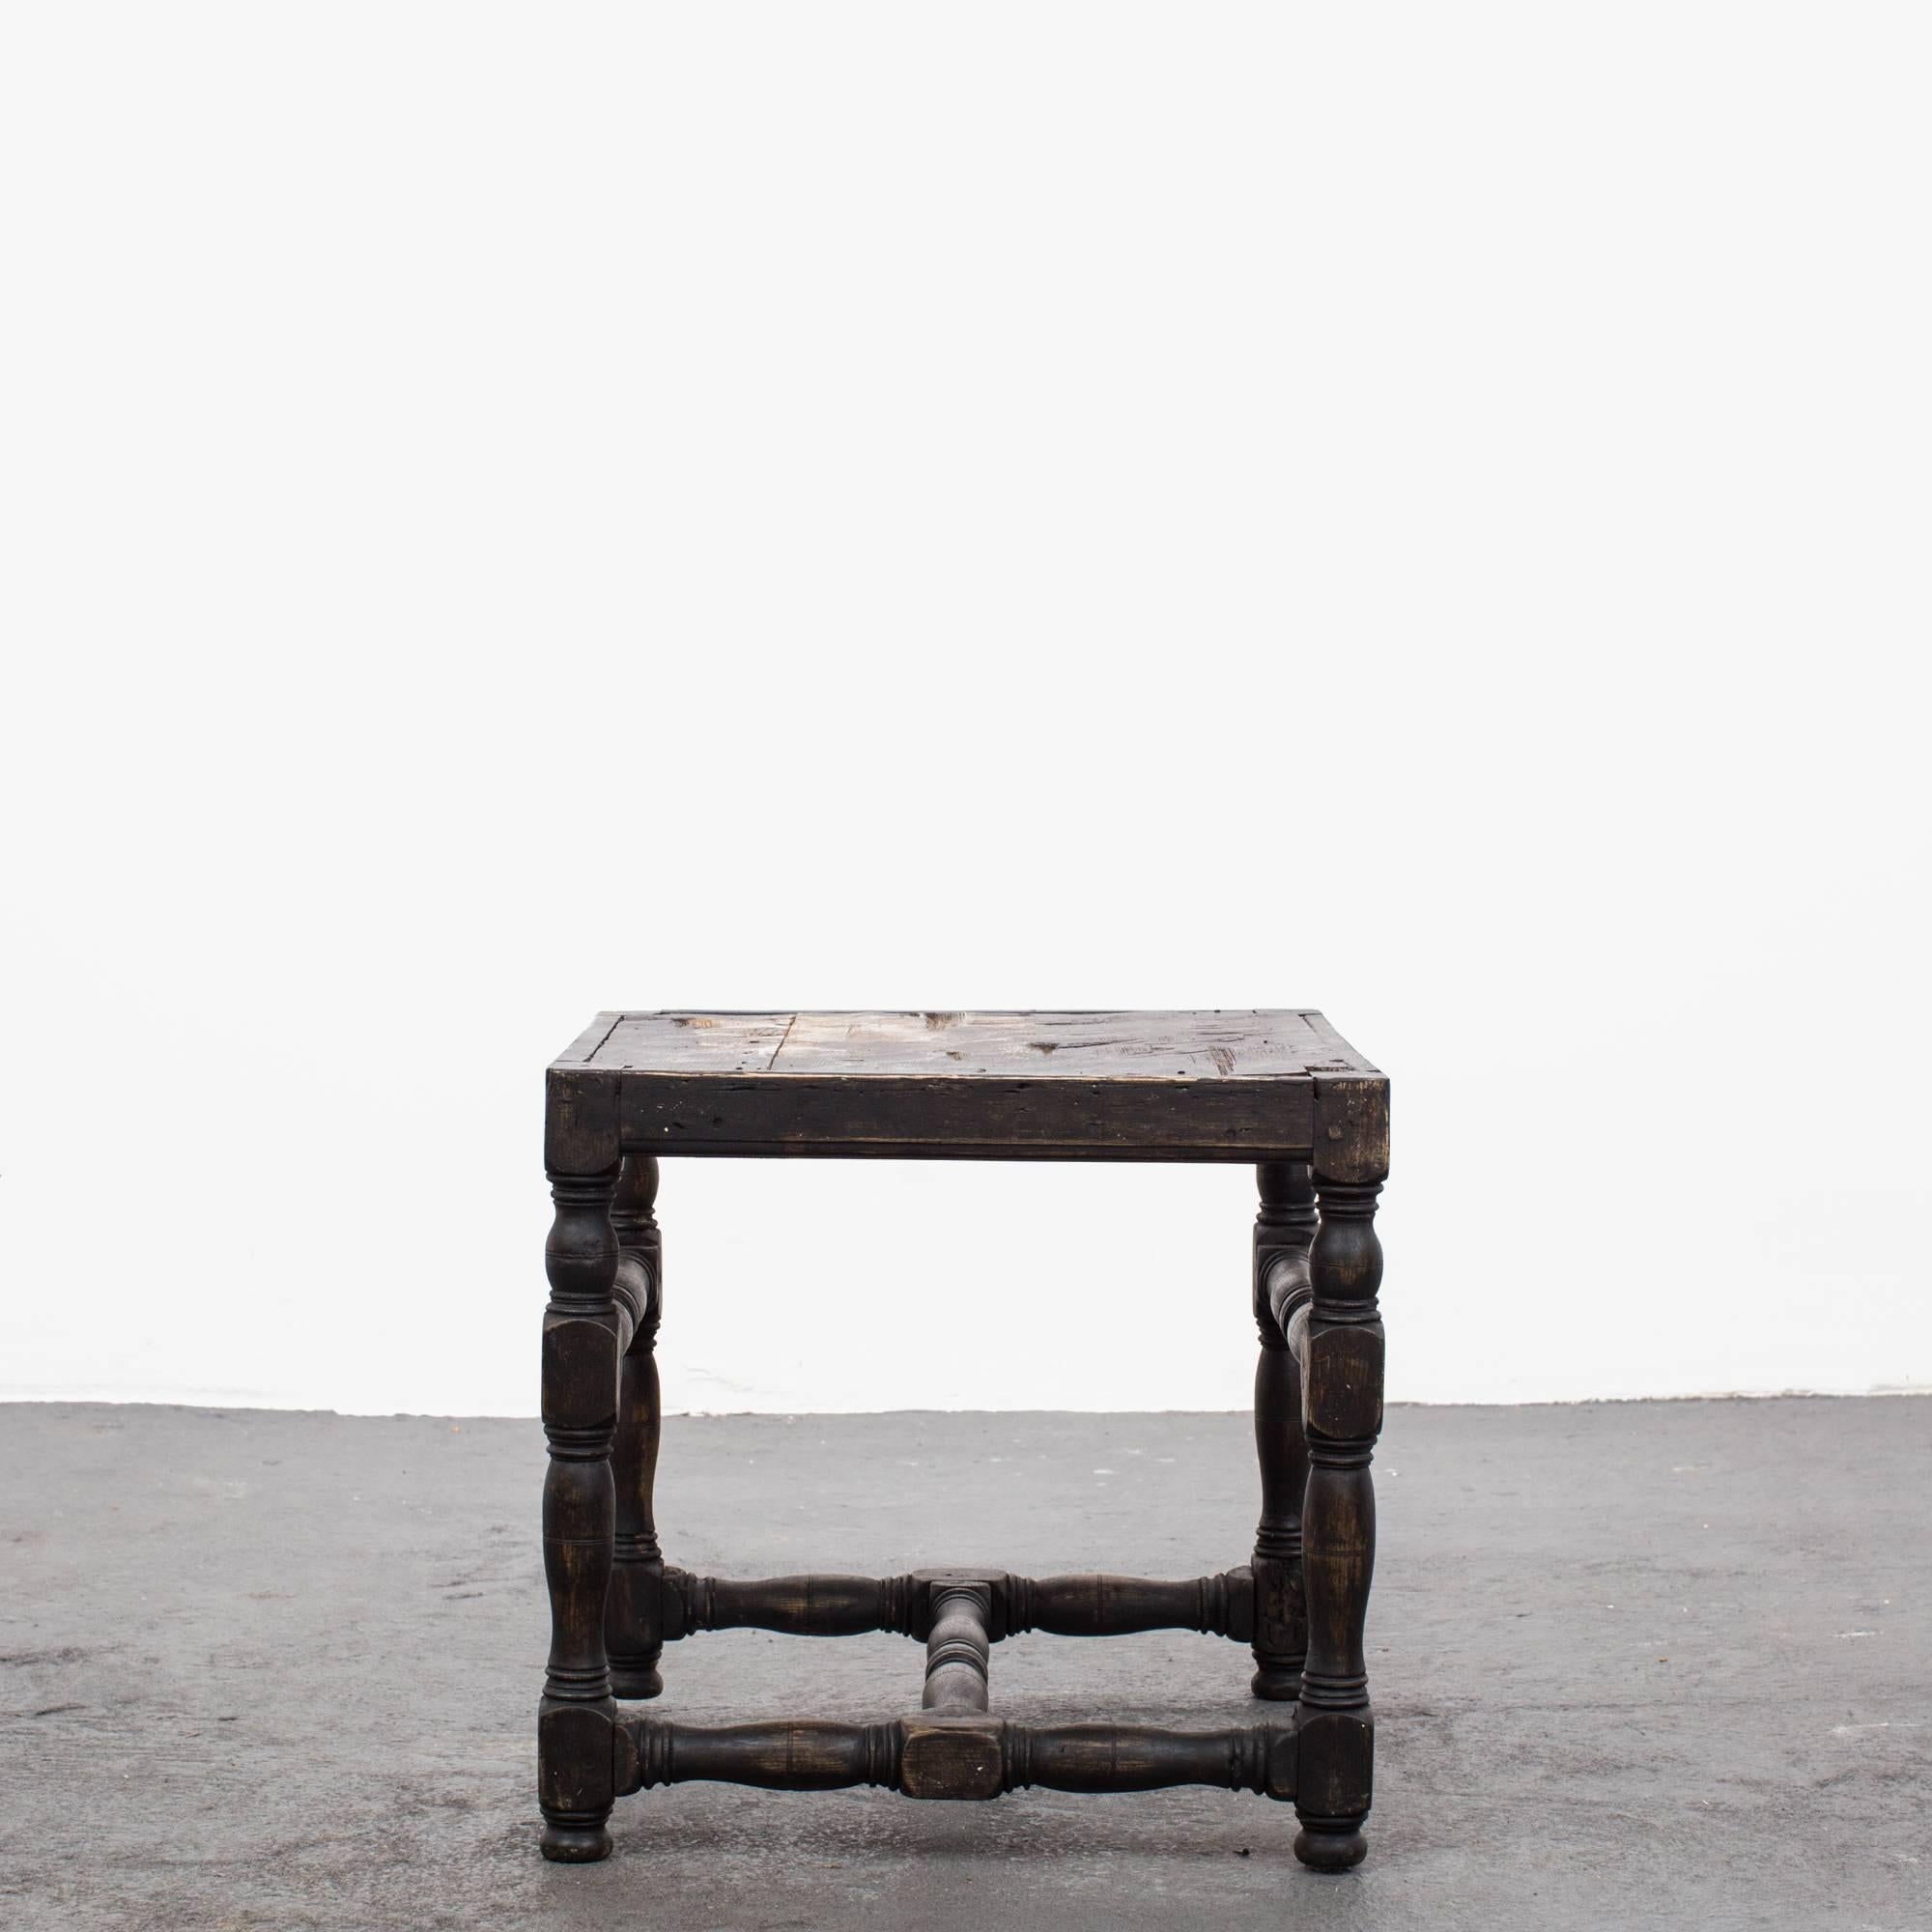 A stool made during the Baroque period in Europe. Painted in our Laserow black and currently un-upholstered.